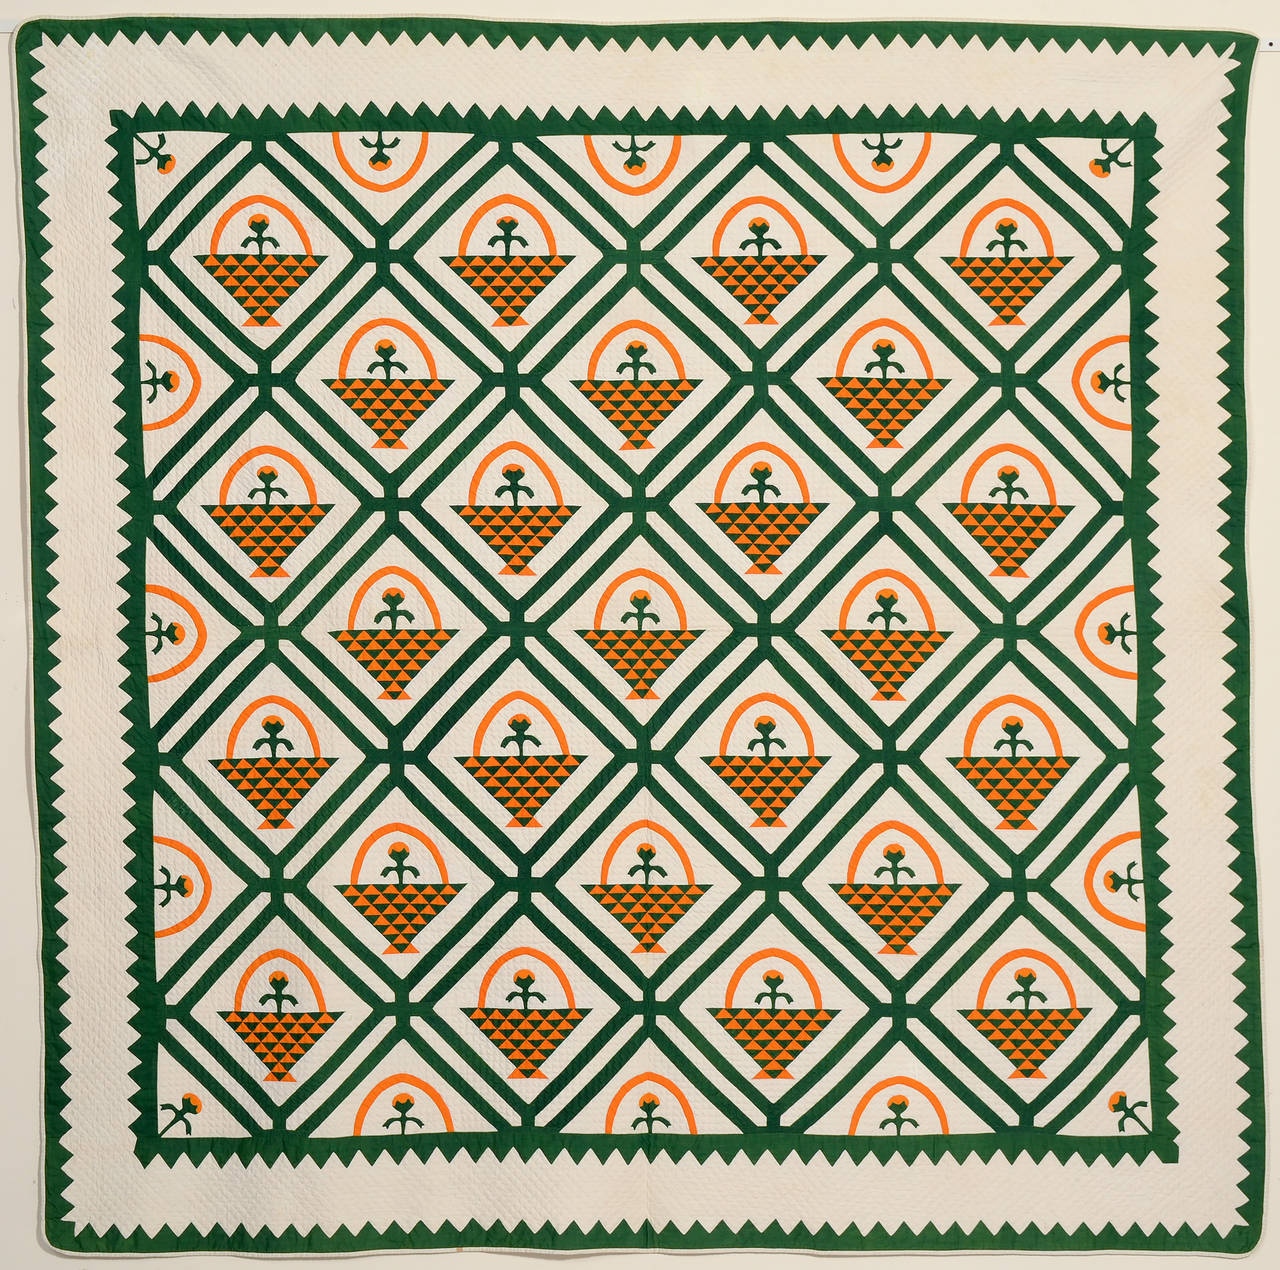 Everything about this multipatterned flower basket quilt is intensely detailed. The triangles forming the baskets are extremely finely pieced. It is very well quilted with small diamond patterning throughout. One wonders whether the maker chose the